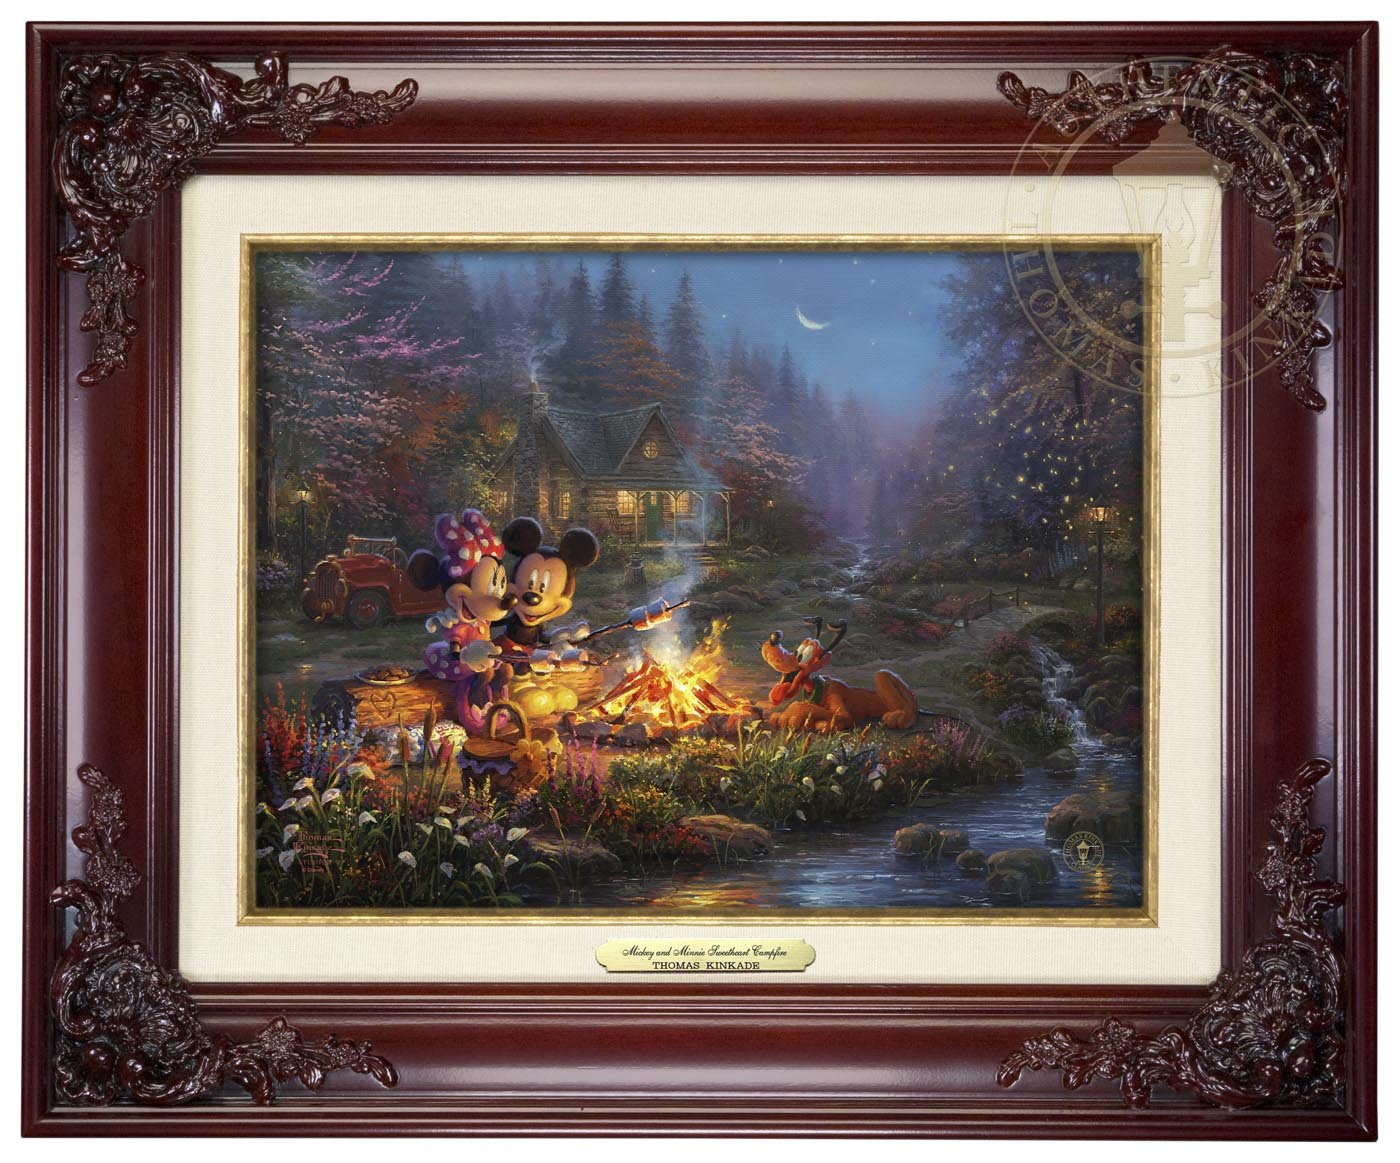 Mickey and Minnie are seen relaxing together on an old log, roasting marshmallows over a crackling campfire after spending a long day of exploring the vast trails of the forest - Brandy Frame